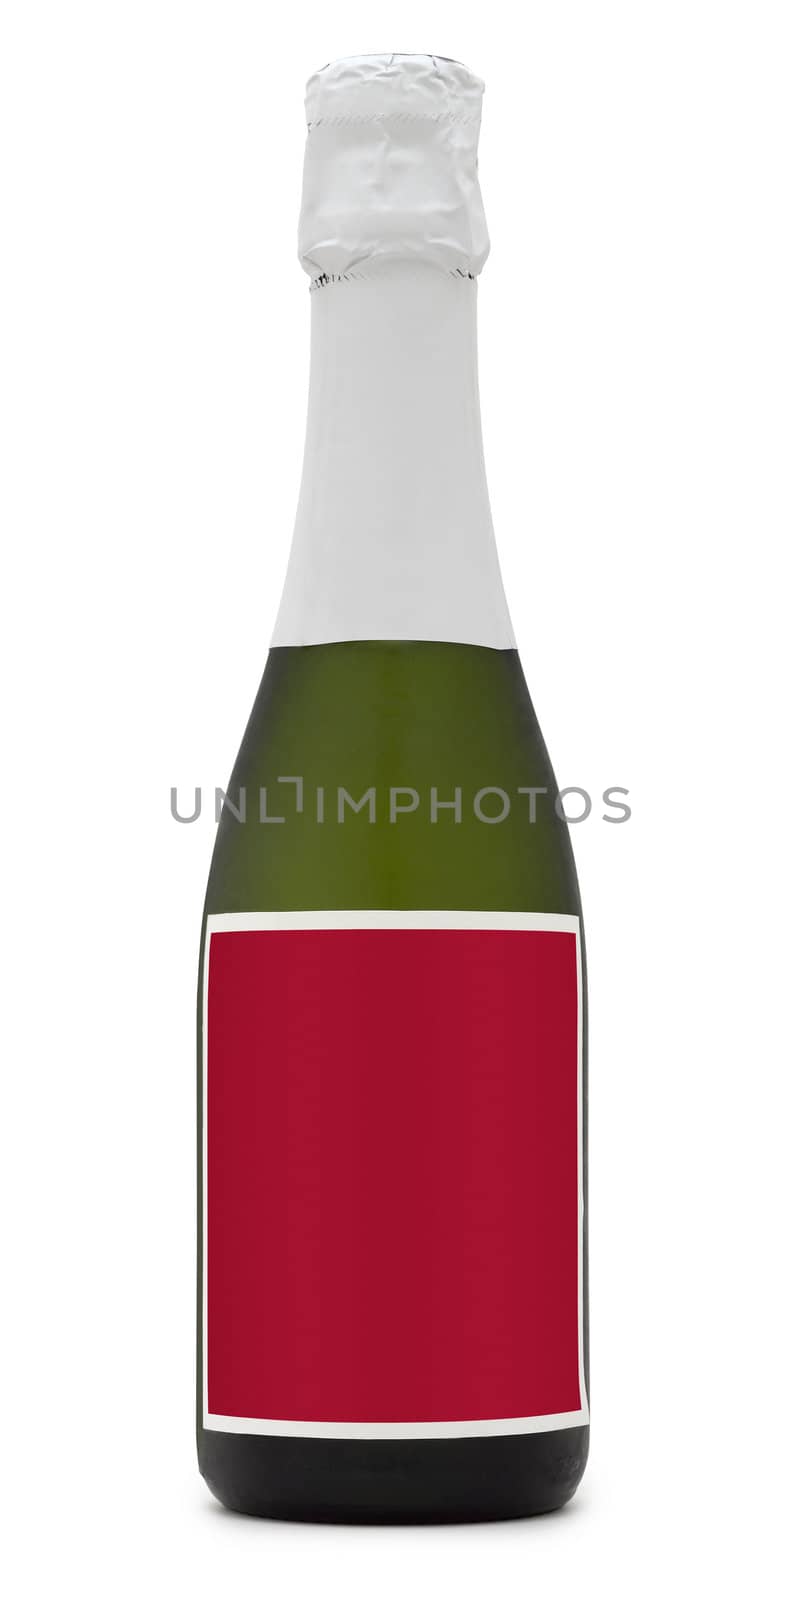 Bottle of champagne (clipping path)and path for label by pbombaert